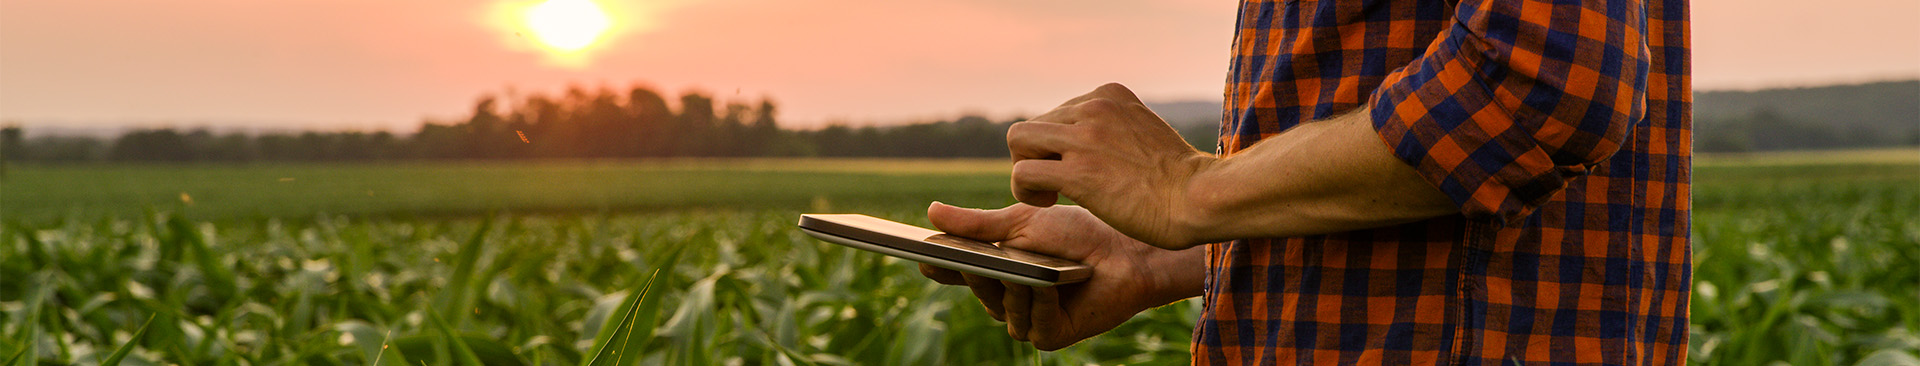 How Technology is Revolutionizing Sustainable Agriculture Featured Image